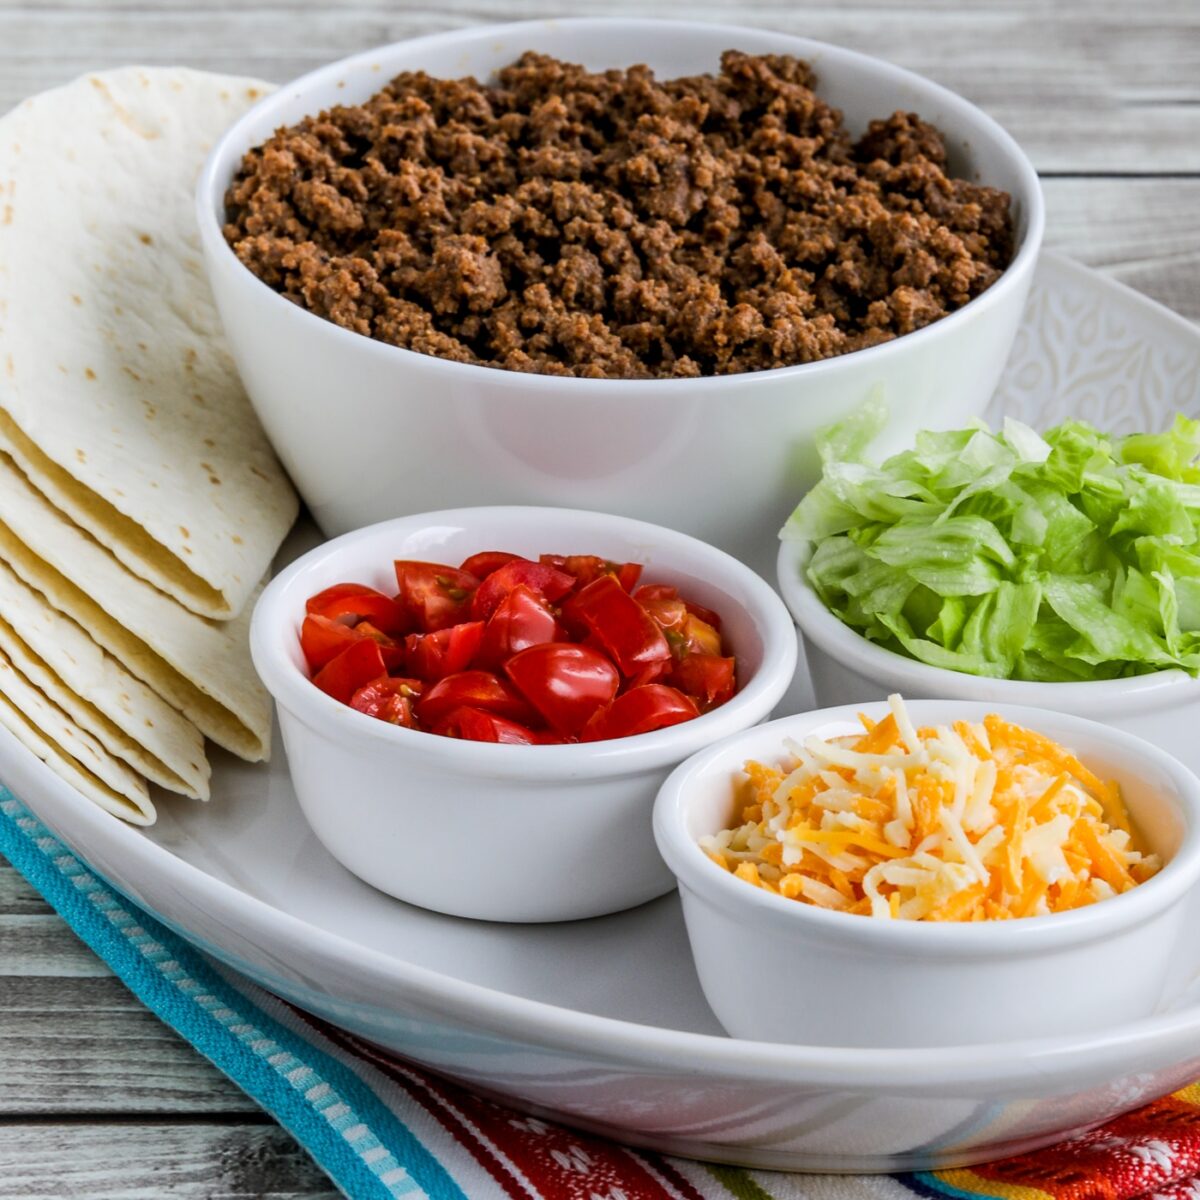 Square image of instant pot taco meat with tortillas and fillings